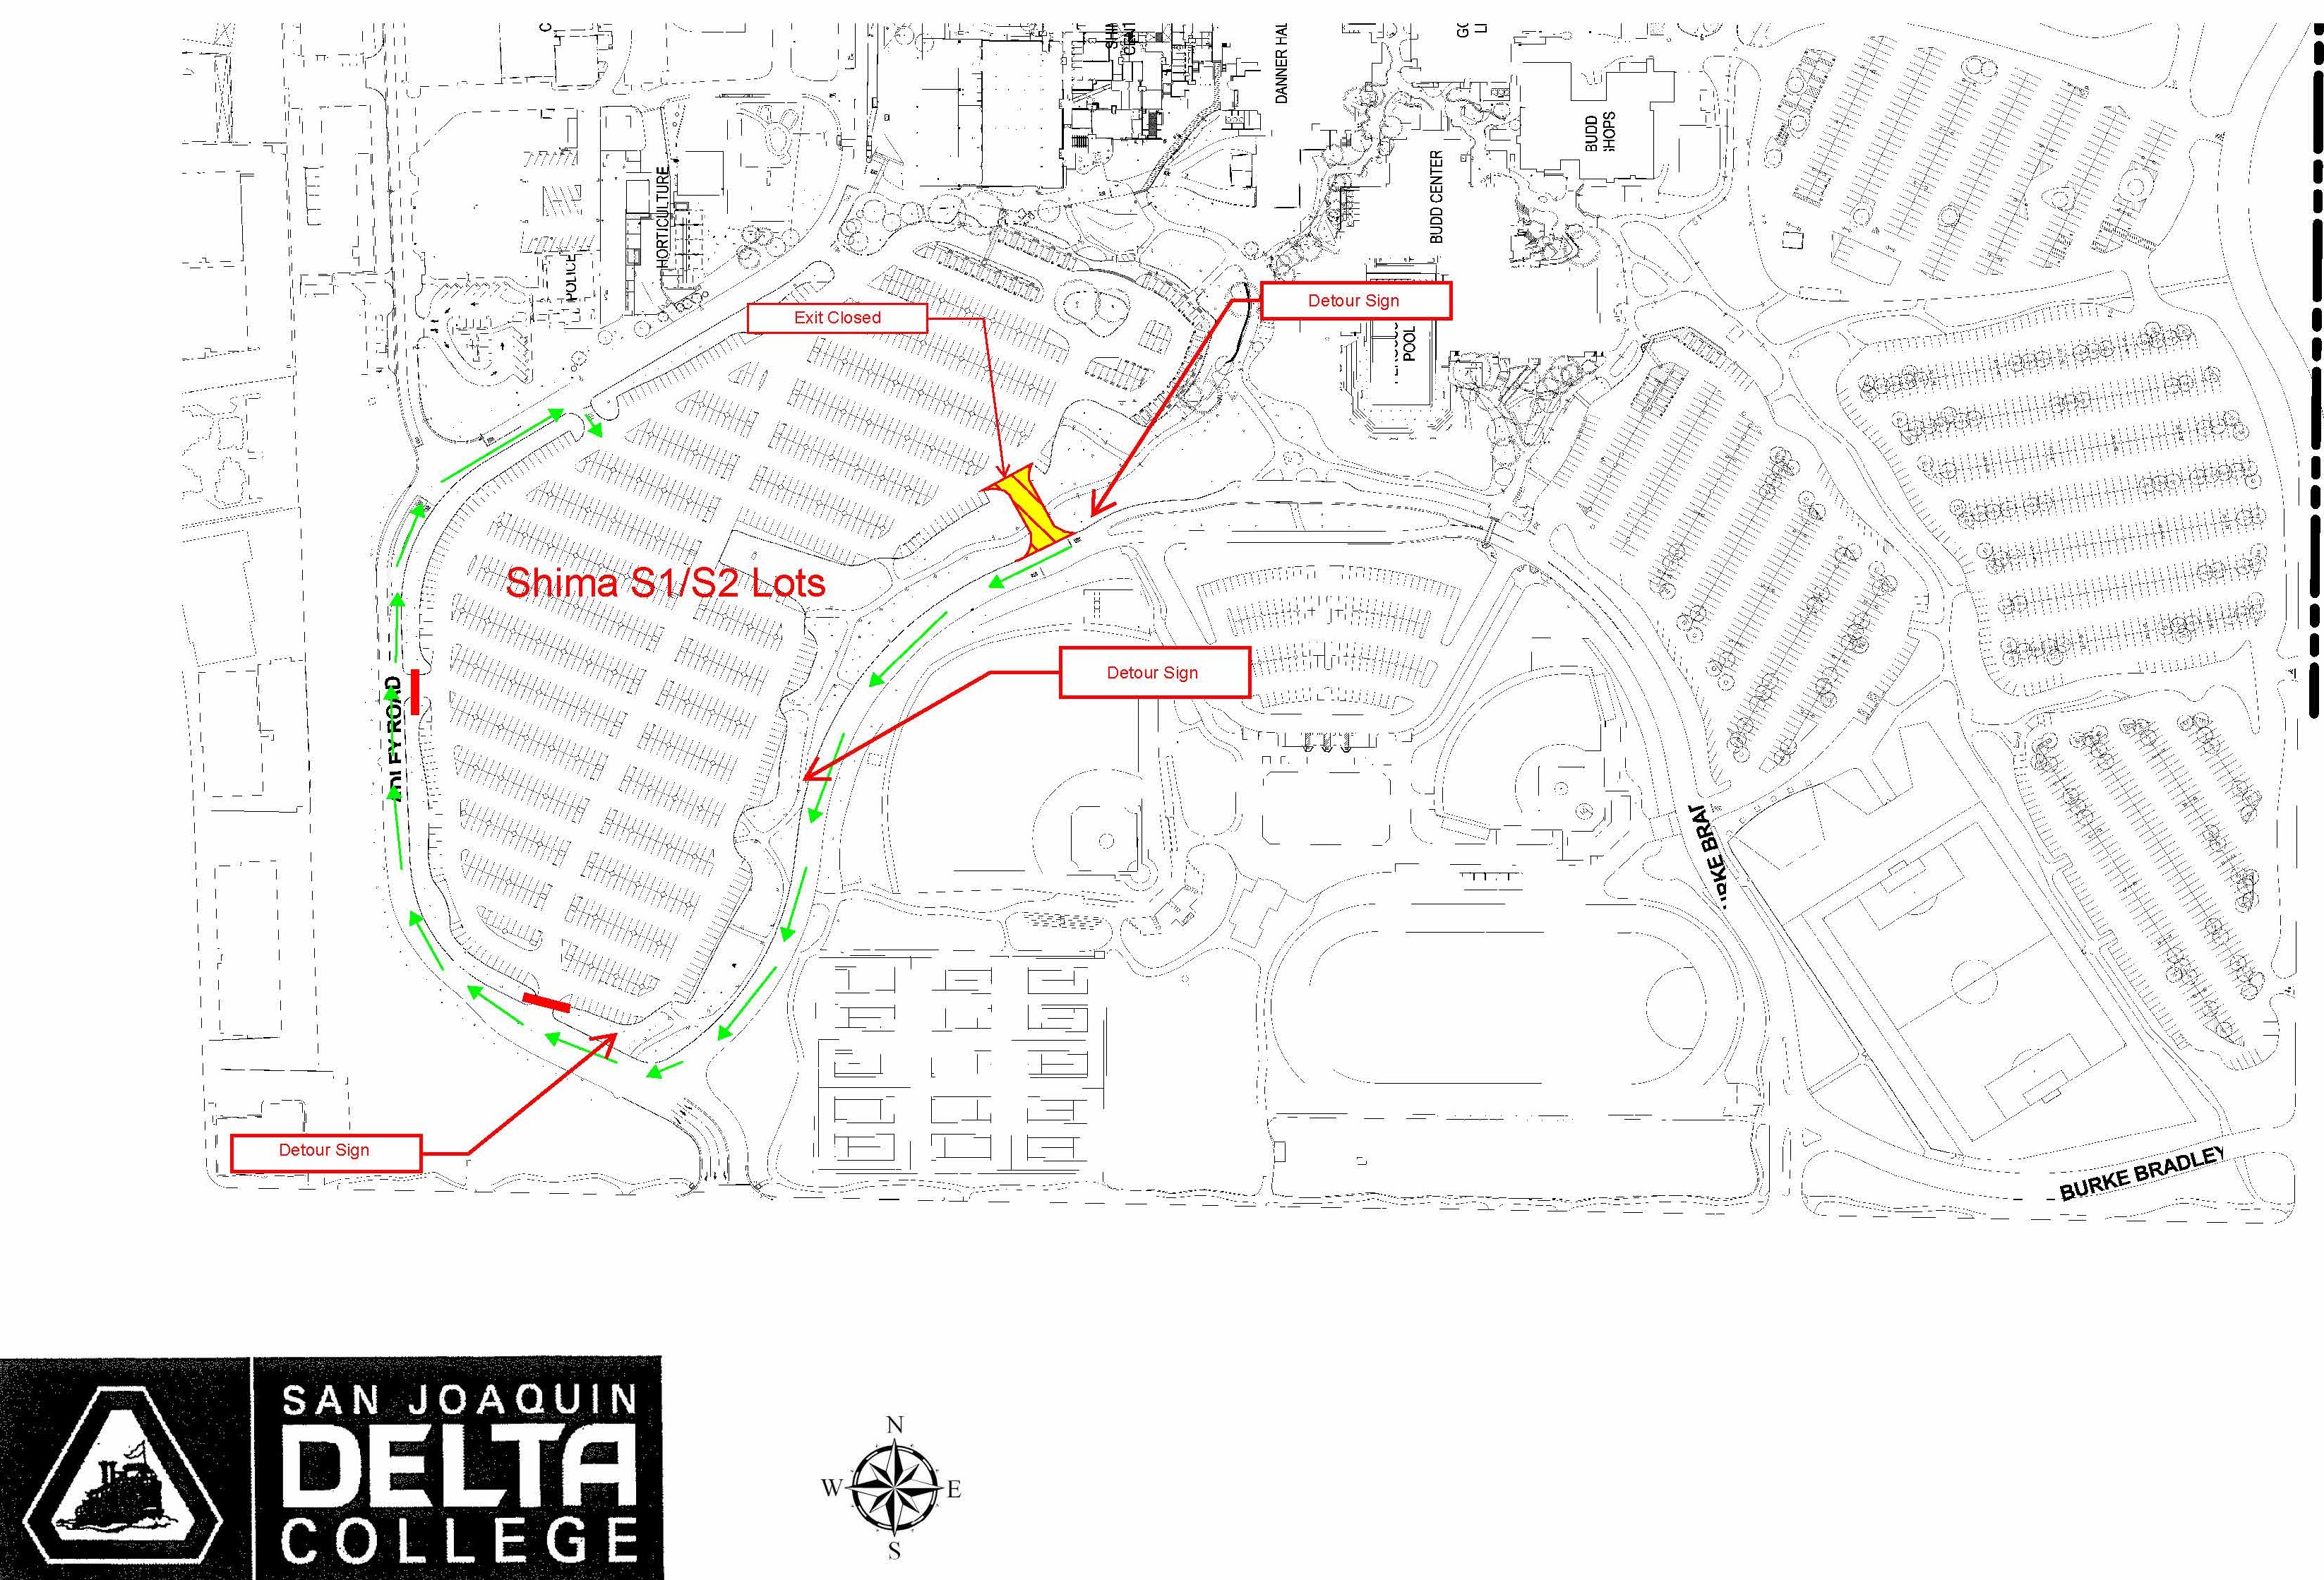   Beginning Monday, Sept. 9, access to the Shima parking lots (S1/S2) will be restricted due to construction.     The southwest entry will be closed. All entry and exit to the Shima parking lots will be from North Burke Bradley Road. 